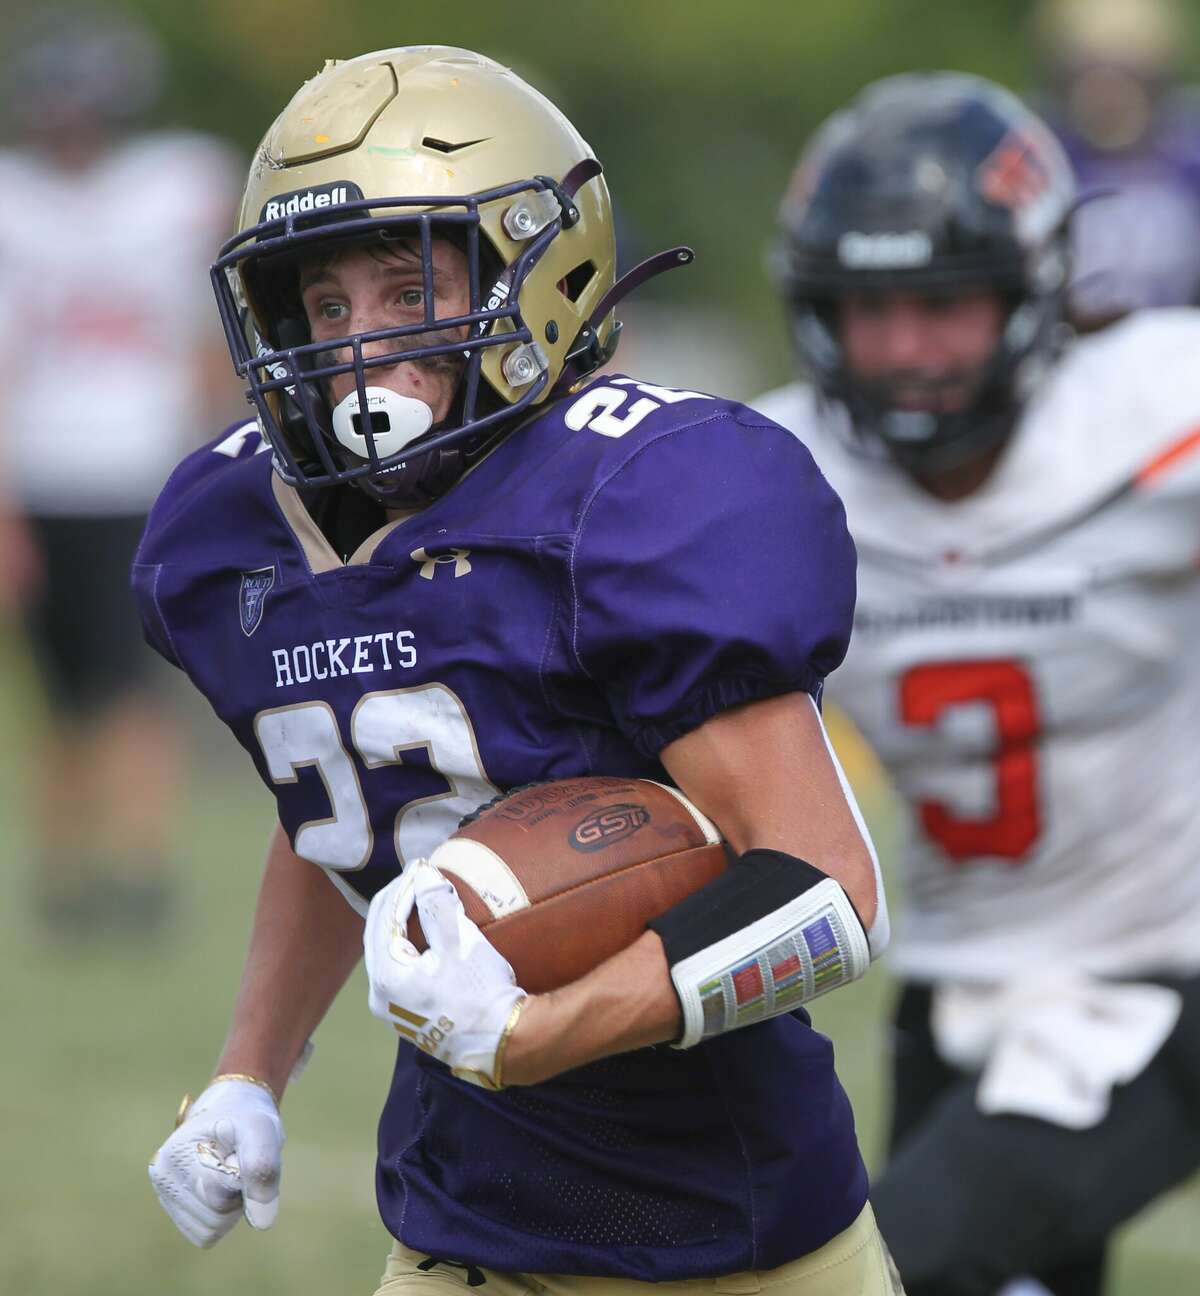 Routt's Aiden Lahey carries the ball in a football game against Beardstown last Saturday in Jacksonville.